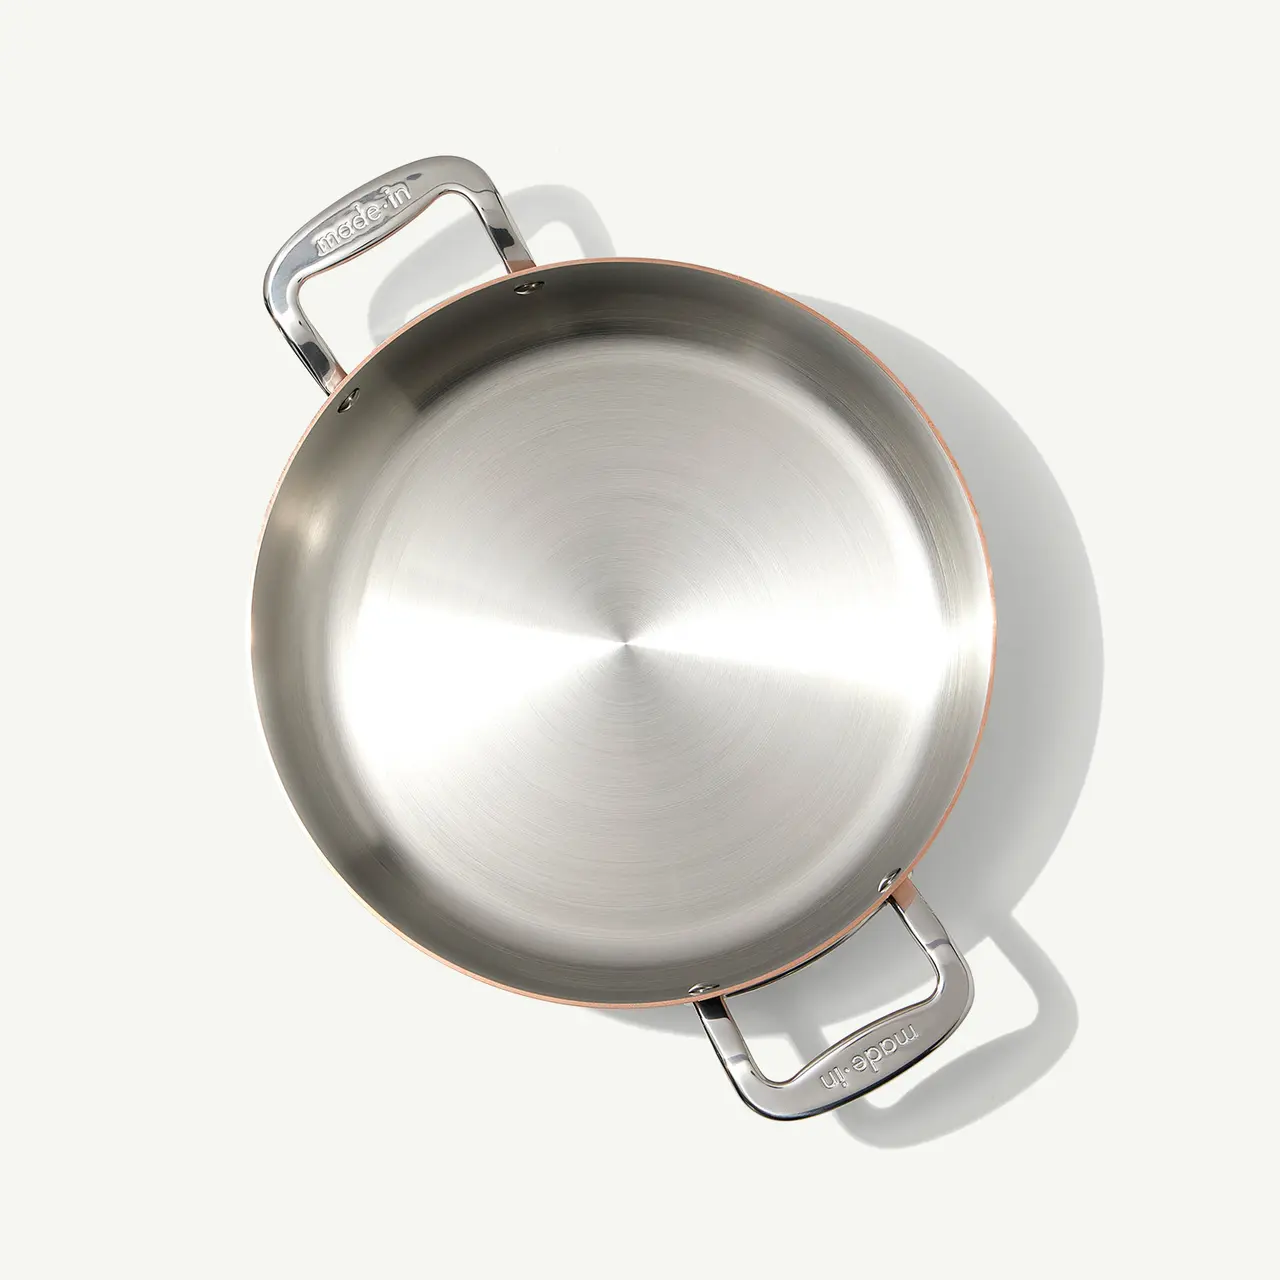 A stainless steel pan with a copper accent on the handle is viewed from above, casting a slight shadow on a light surface.